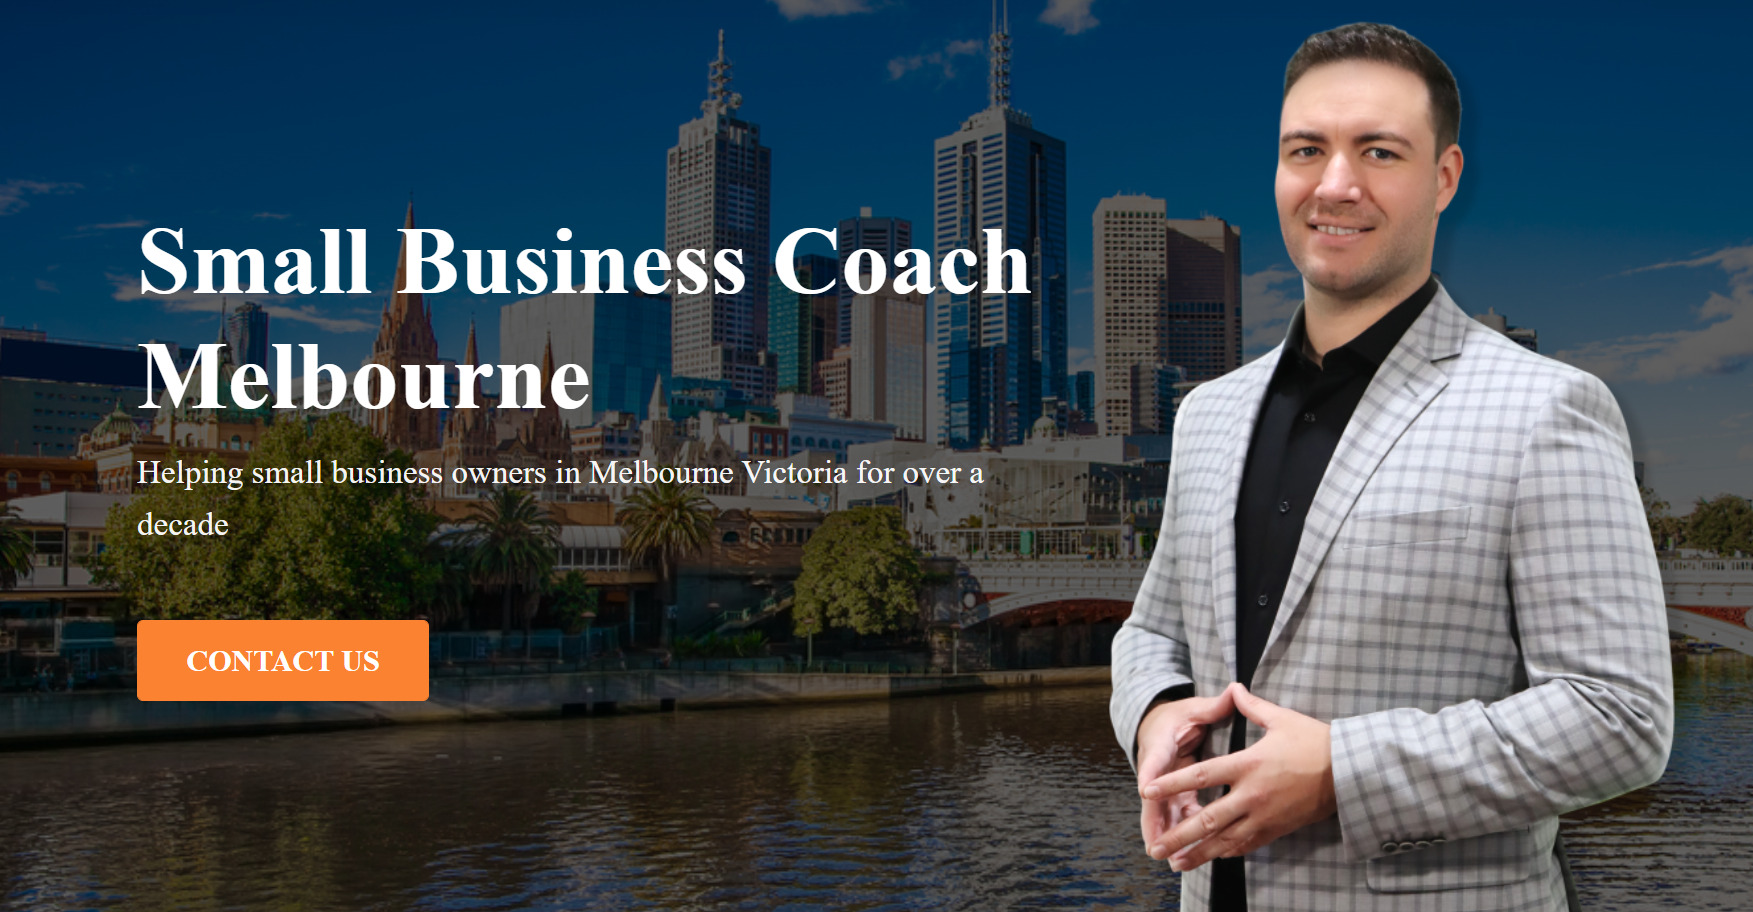 Small Business Coach Melbourne - Over A Decade Of Experience